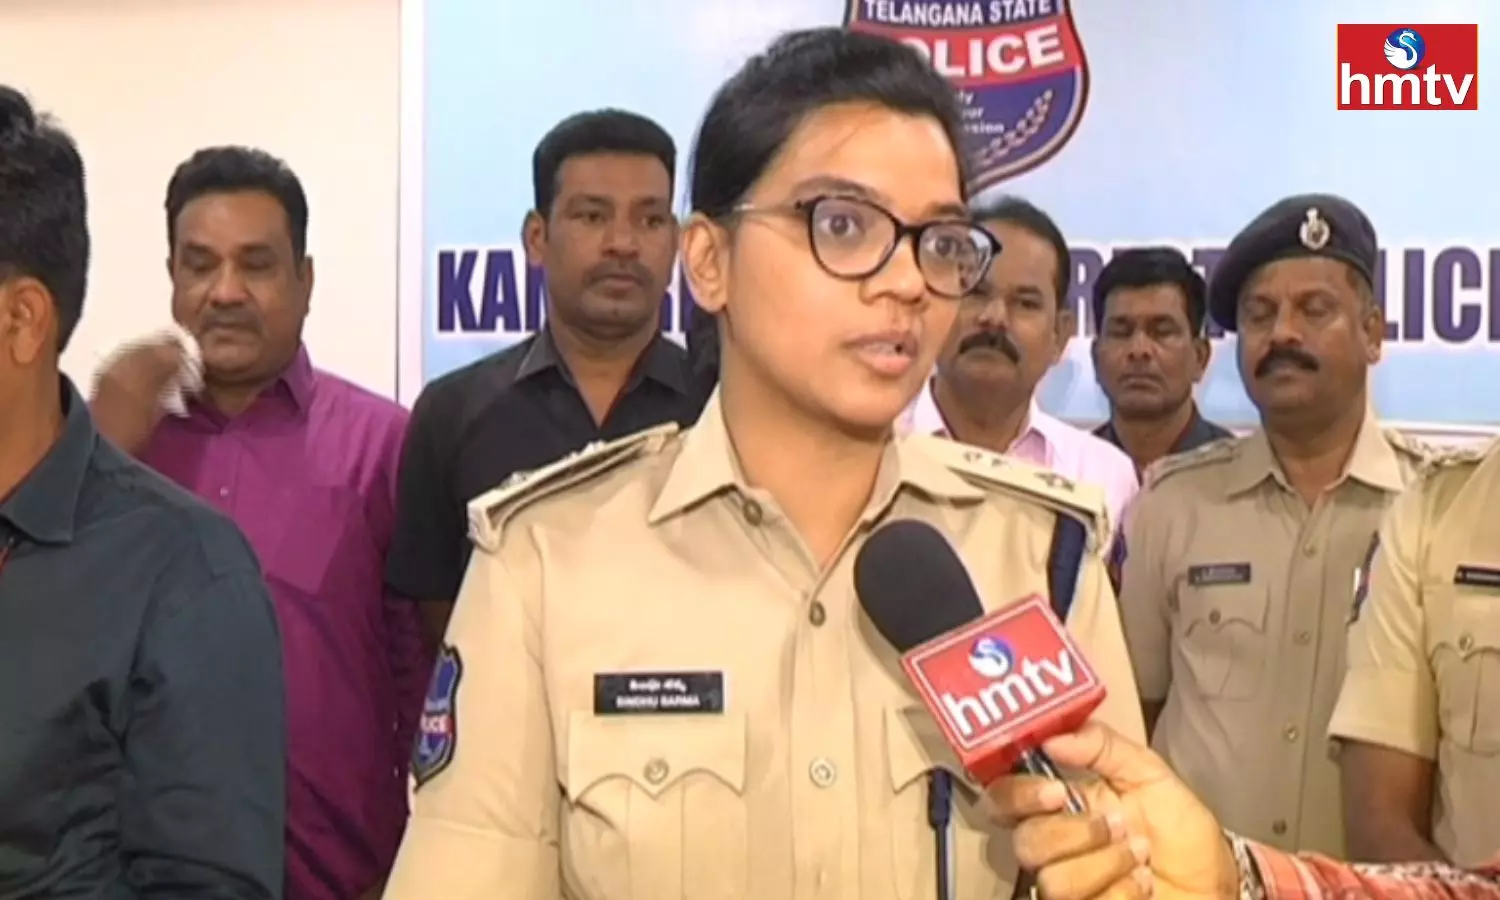 Six Members Of The Same Family Were Killed To Get Property Says SP Sindhu Sharma